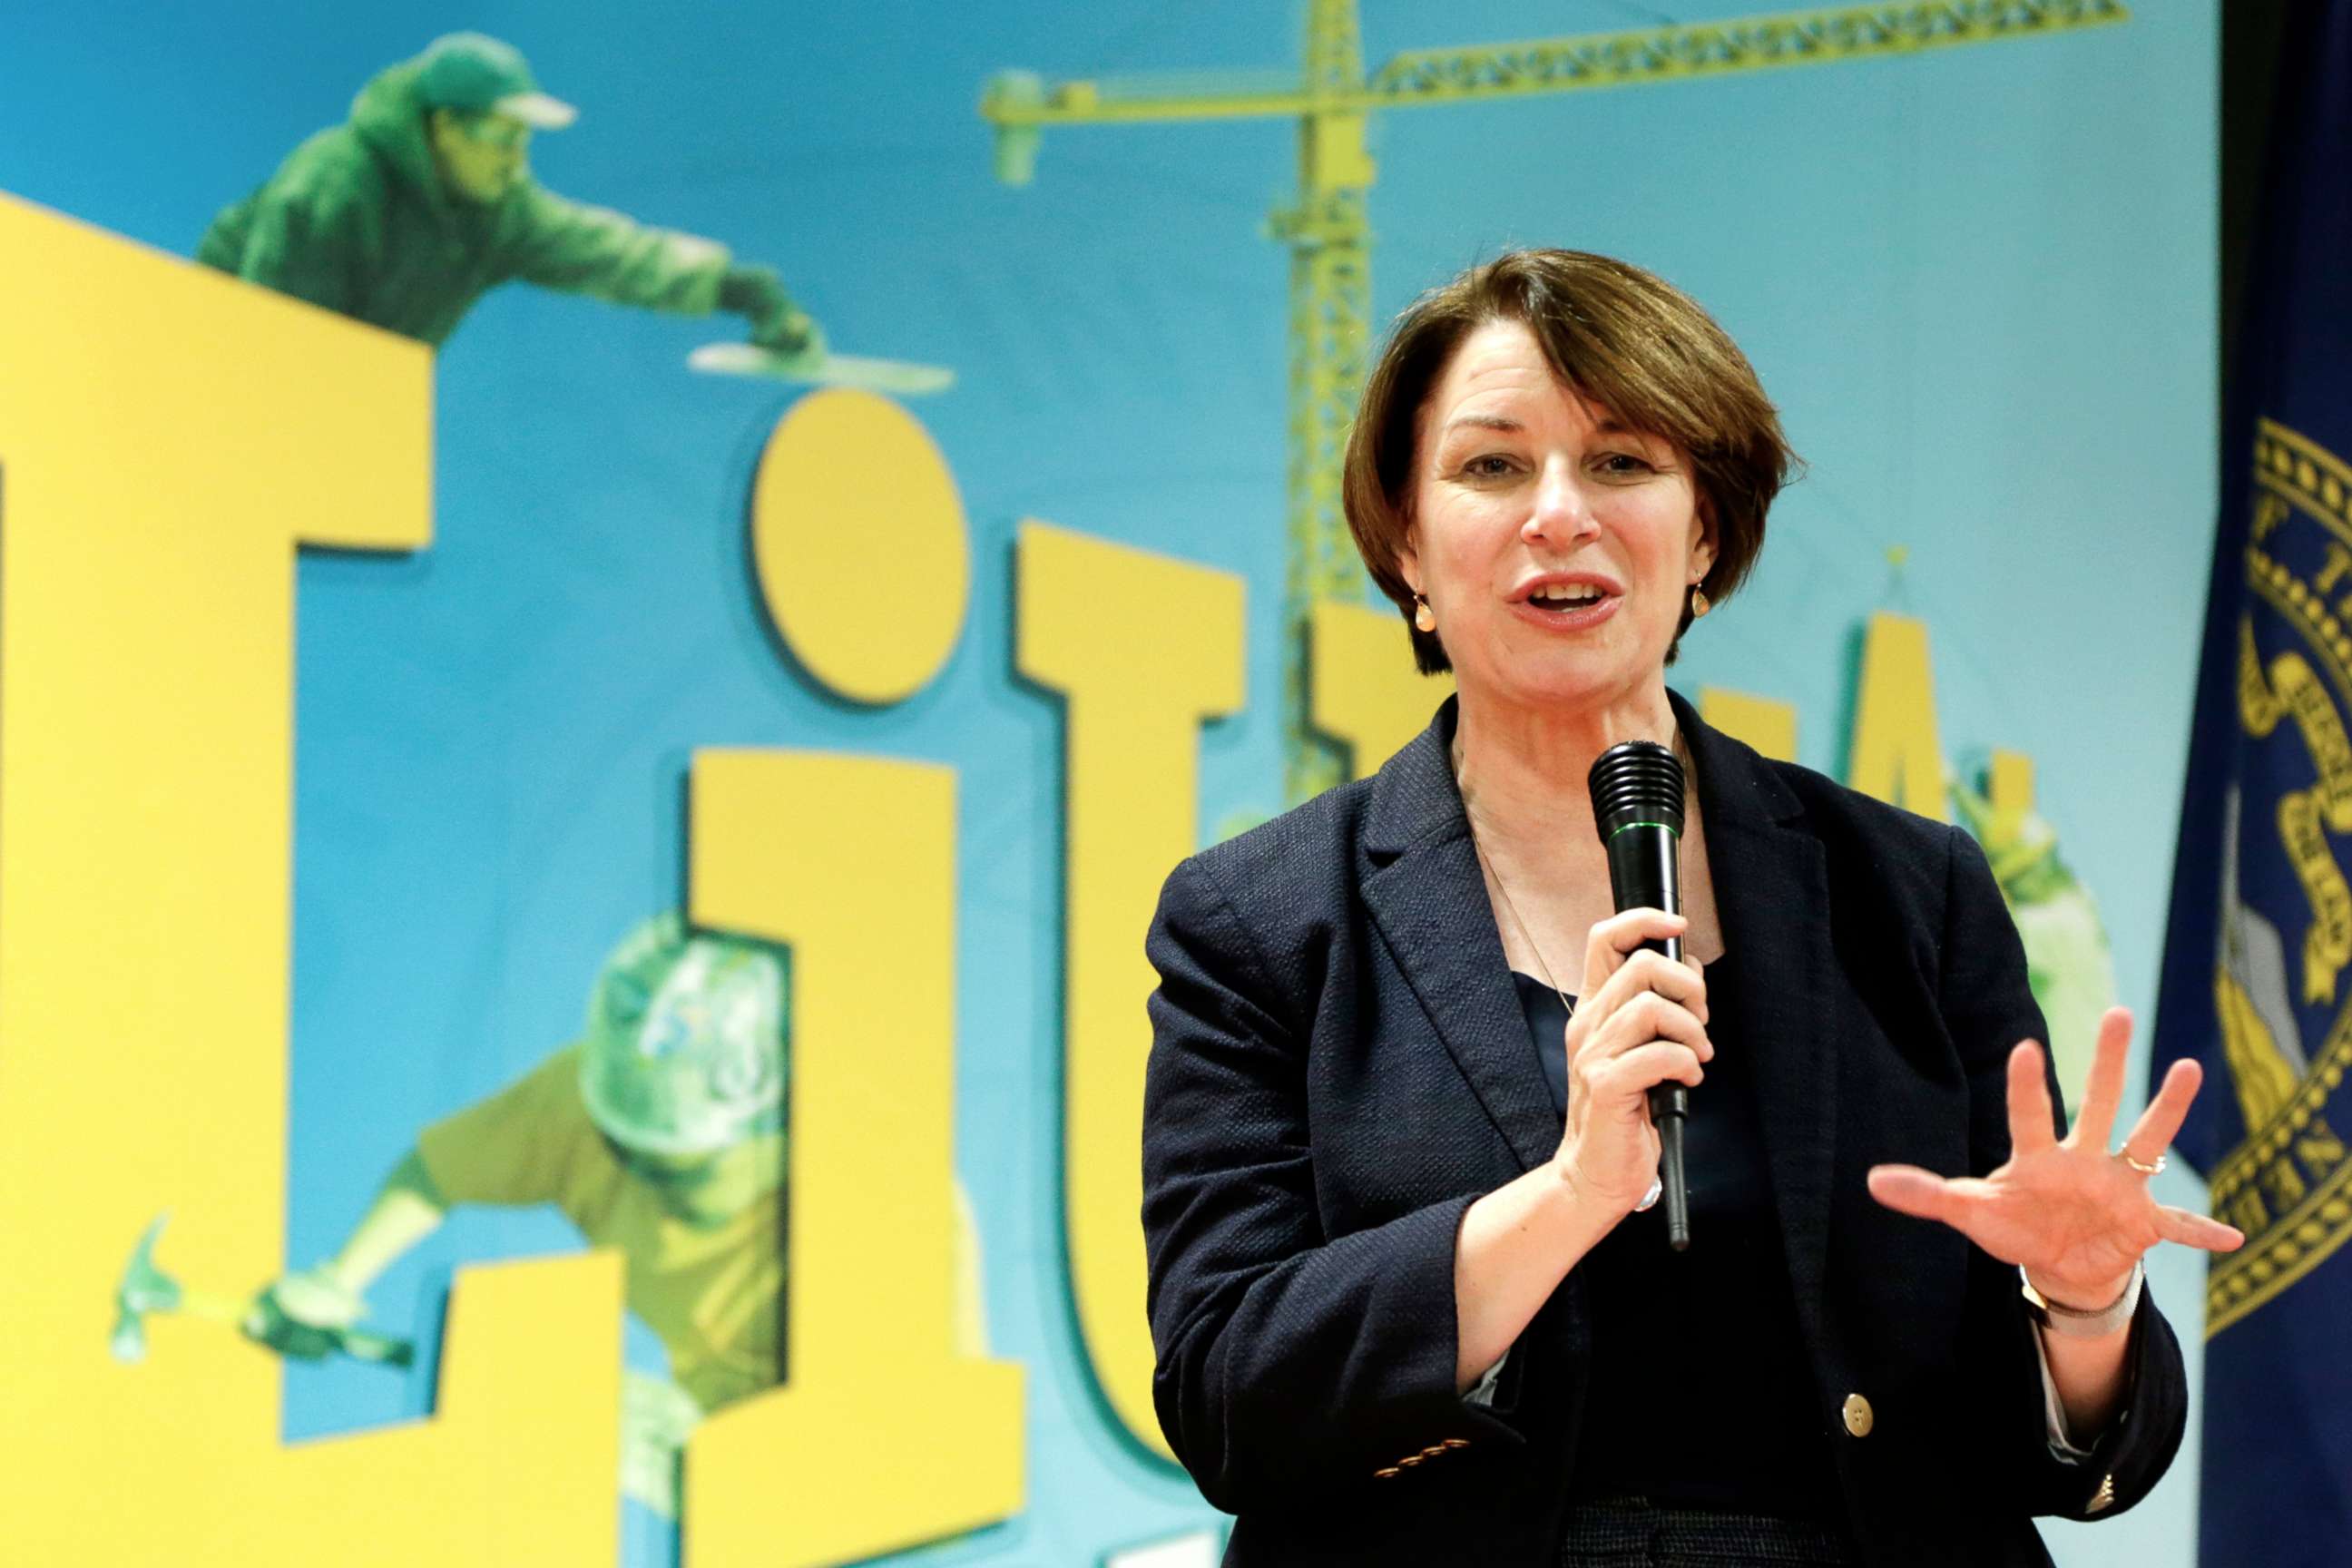 PHOTO: Democratic presidential candidate Sen. Amy Klobuchar speaks during a campaign stop in Omaha, Neb., March 29, 2019.